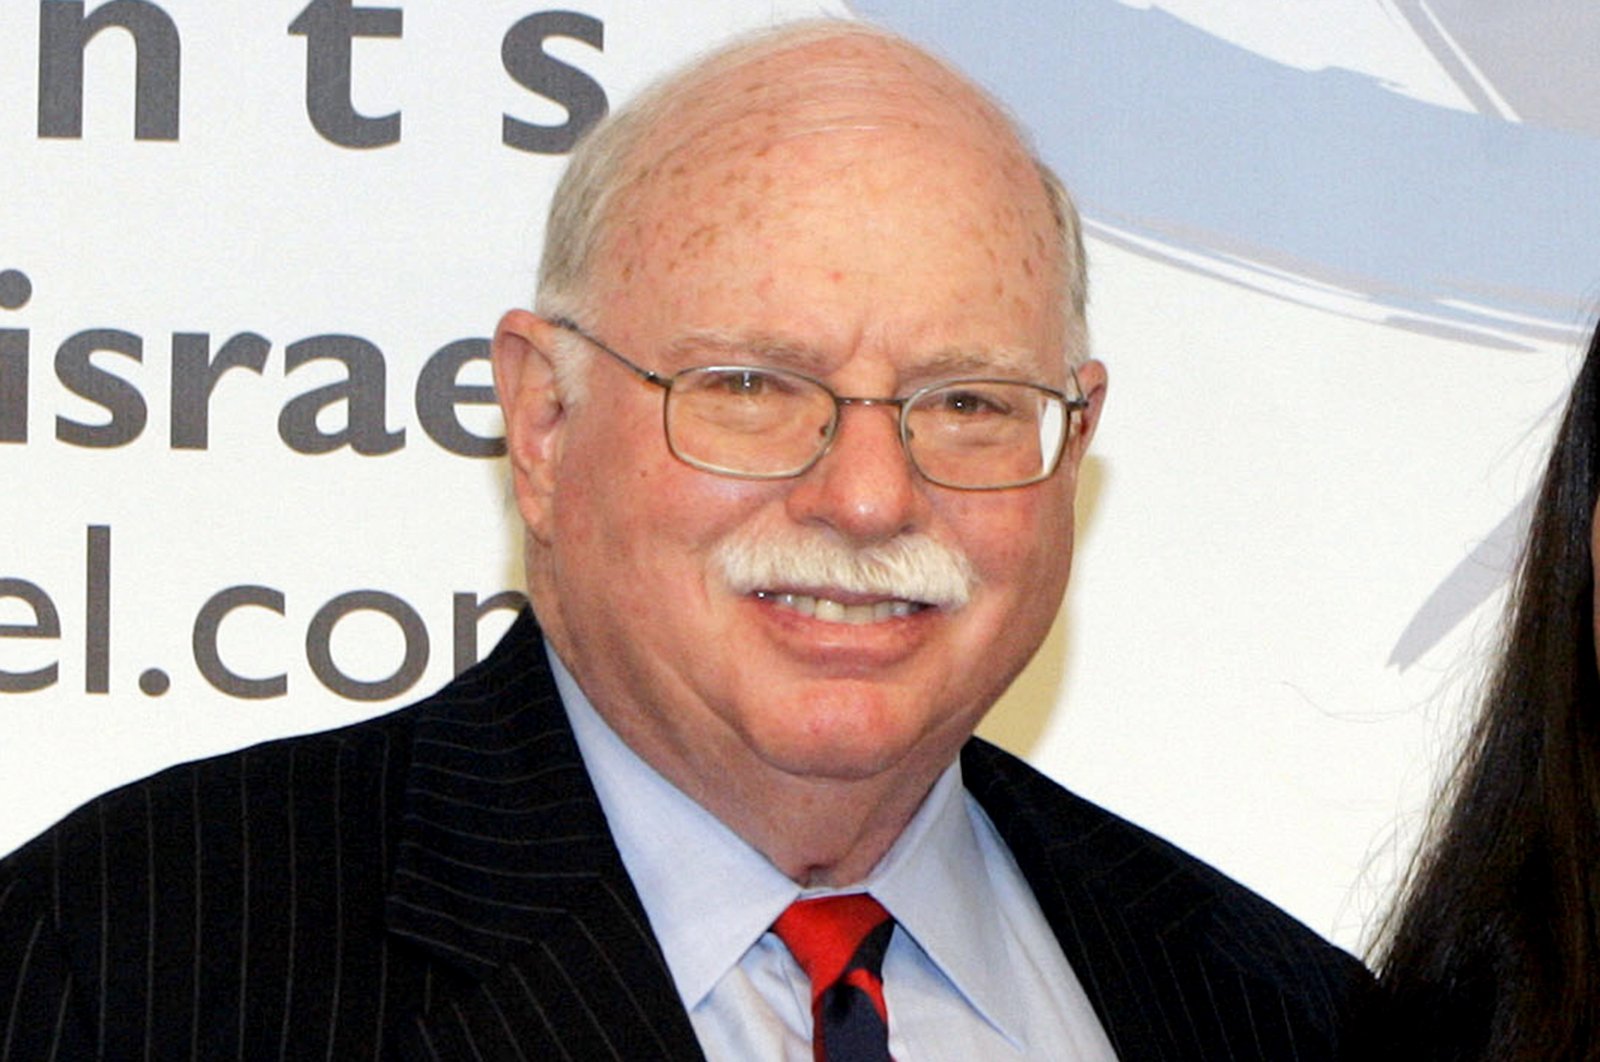 Philanthropist Michael Steinhardt, founder of Taglit-Birthright Israel, poses for photos, May, 31, 2006, in New York, U.S. (AP Photo)